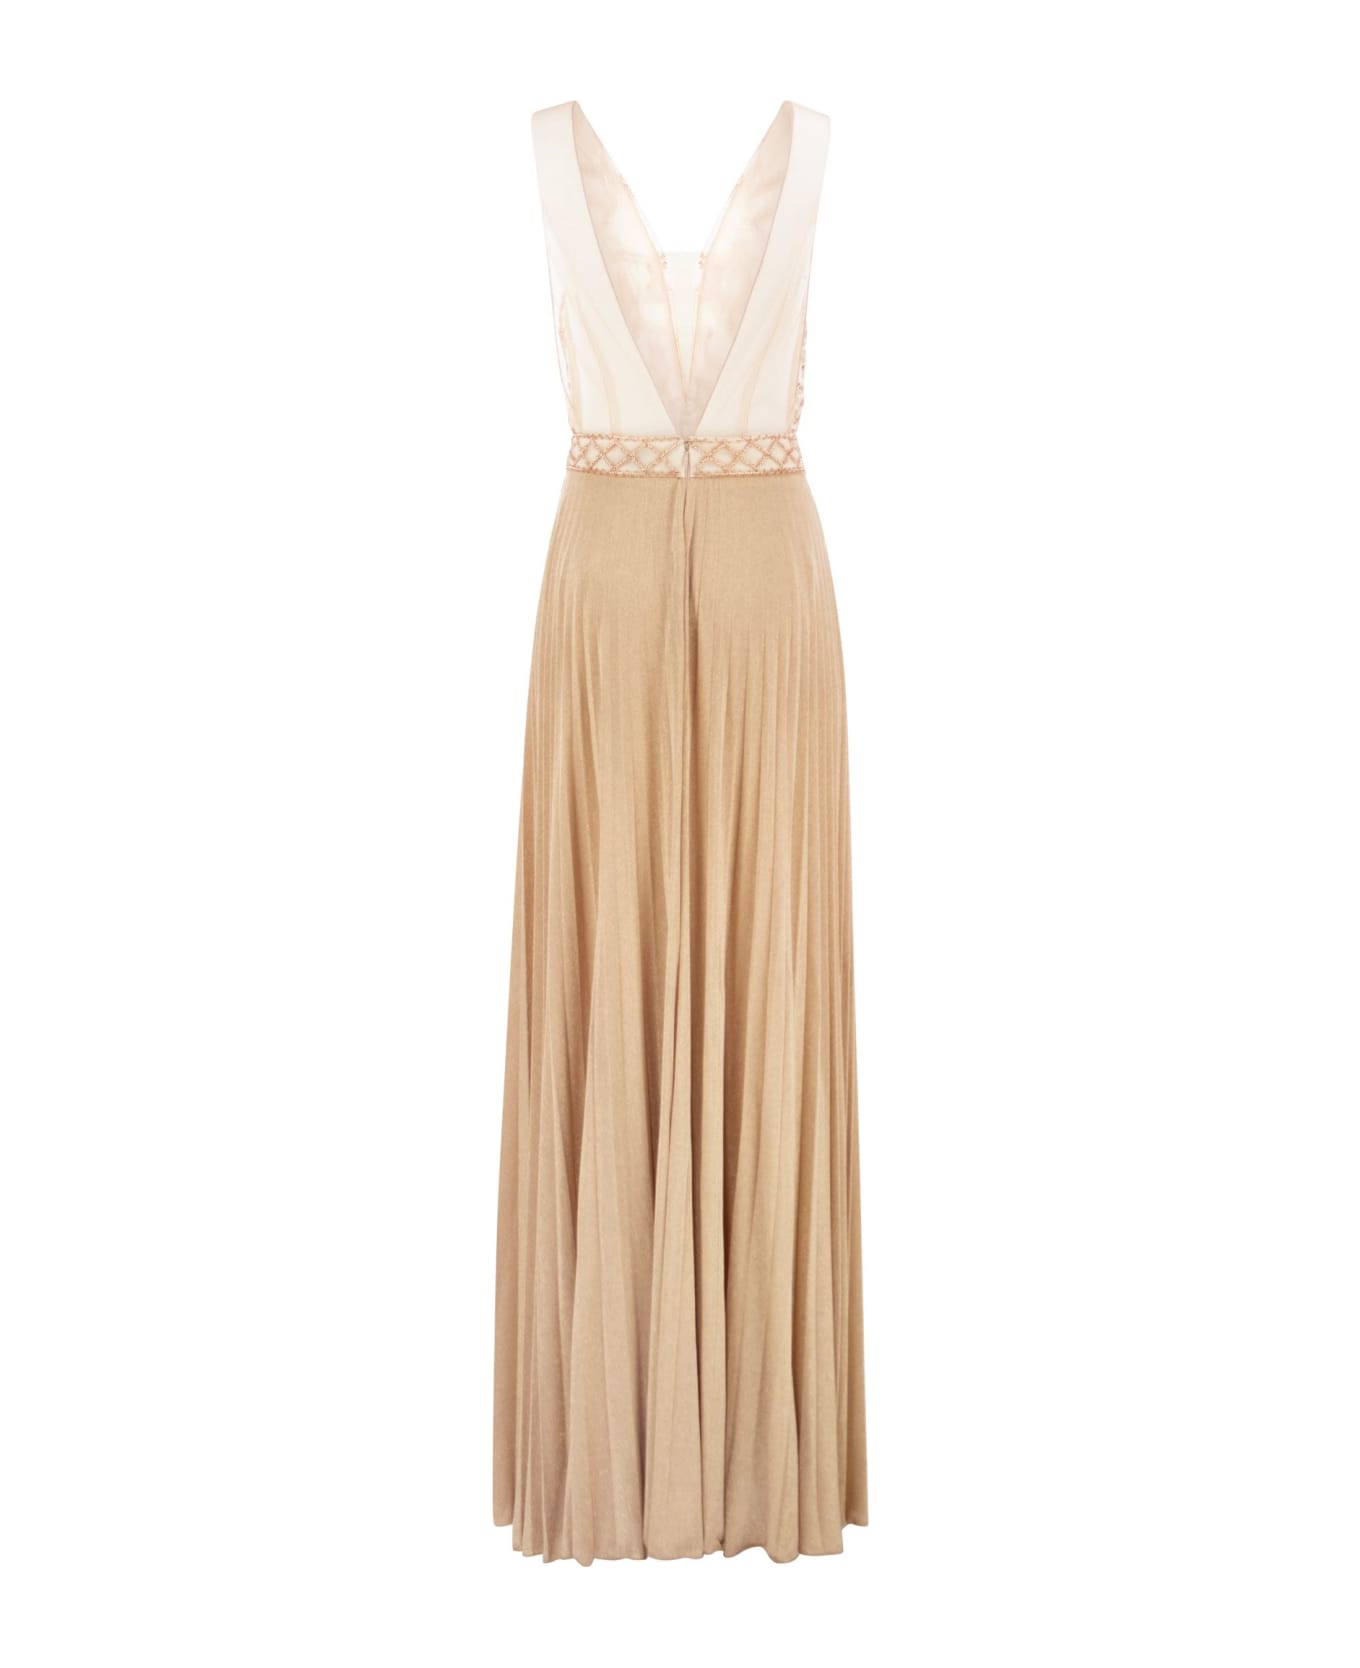 Elisabetta Franchi Red Carpet Dress With Embroidery - Pink